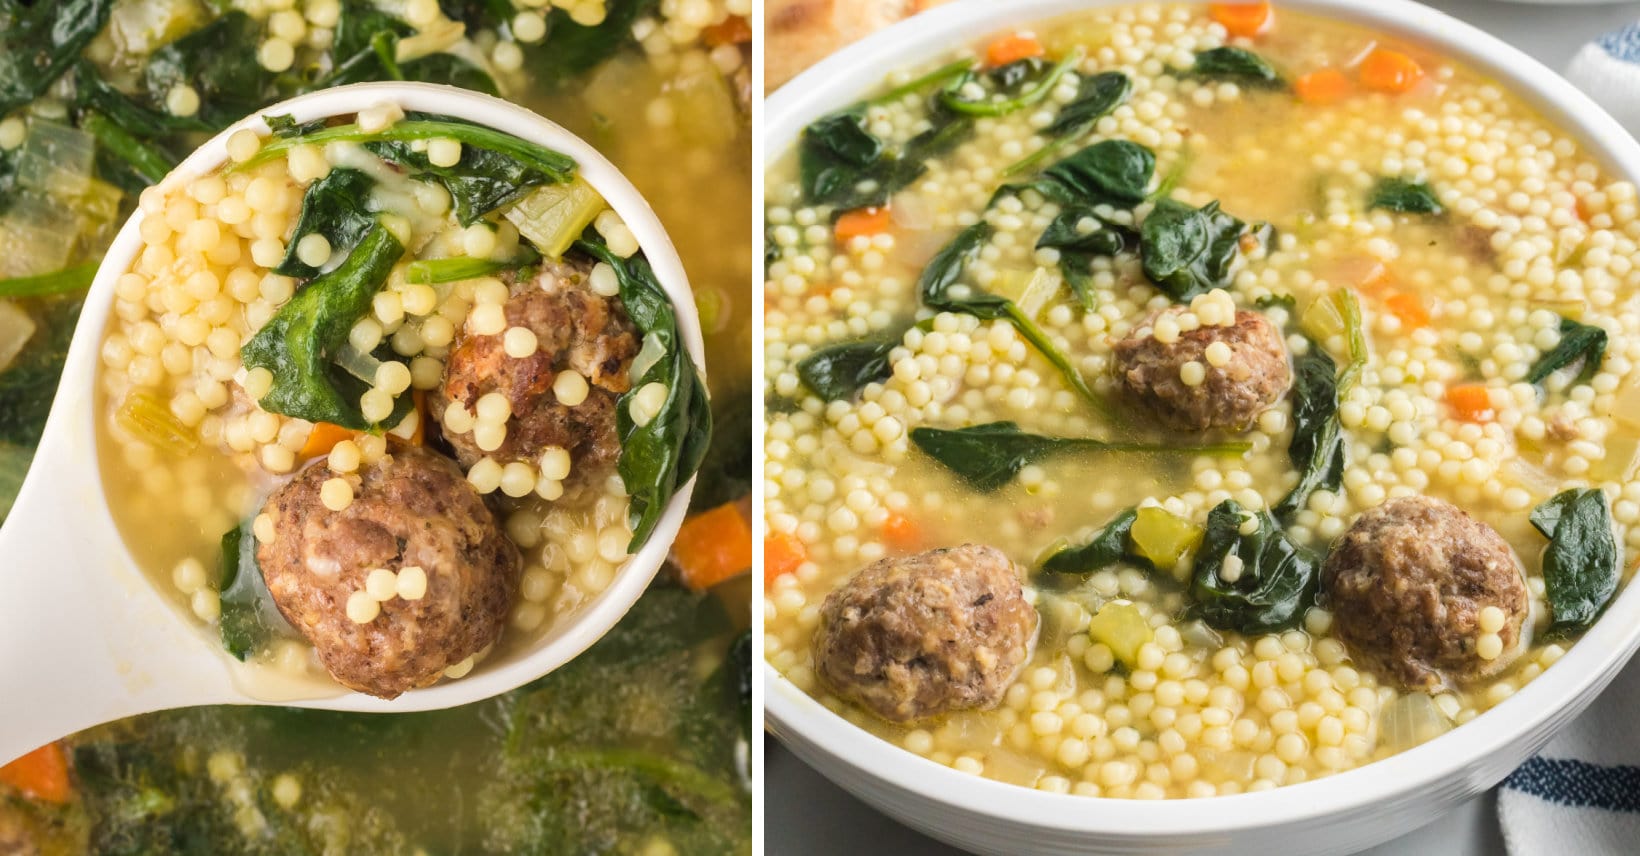 Italian Wedding Soup | Kitchen Fun With My 3 Sons